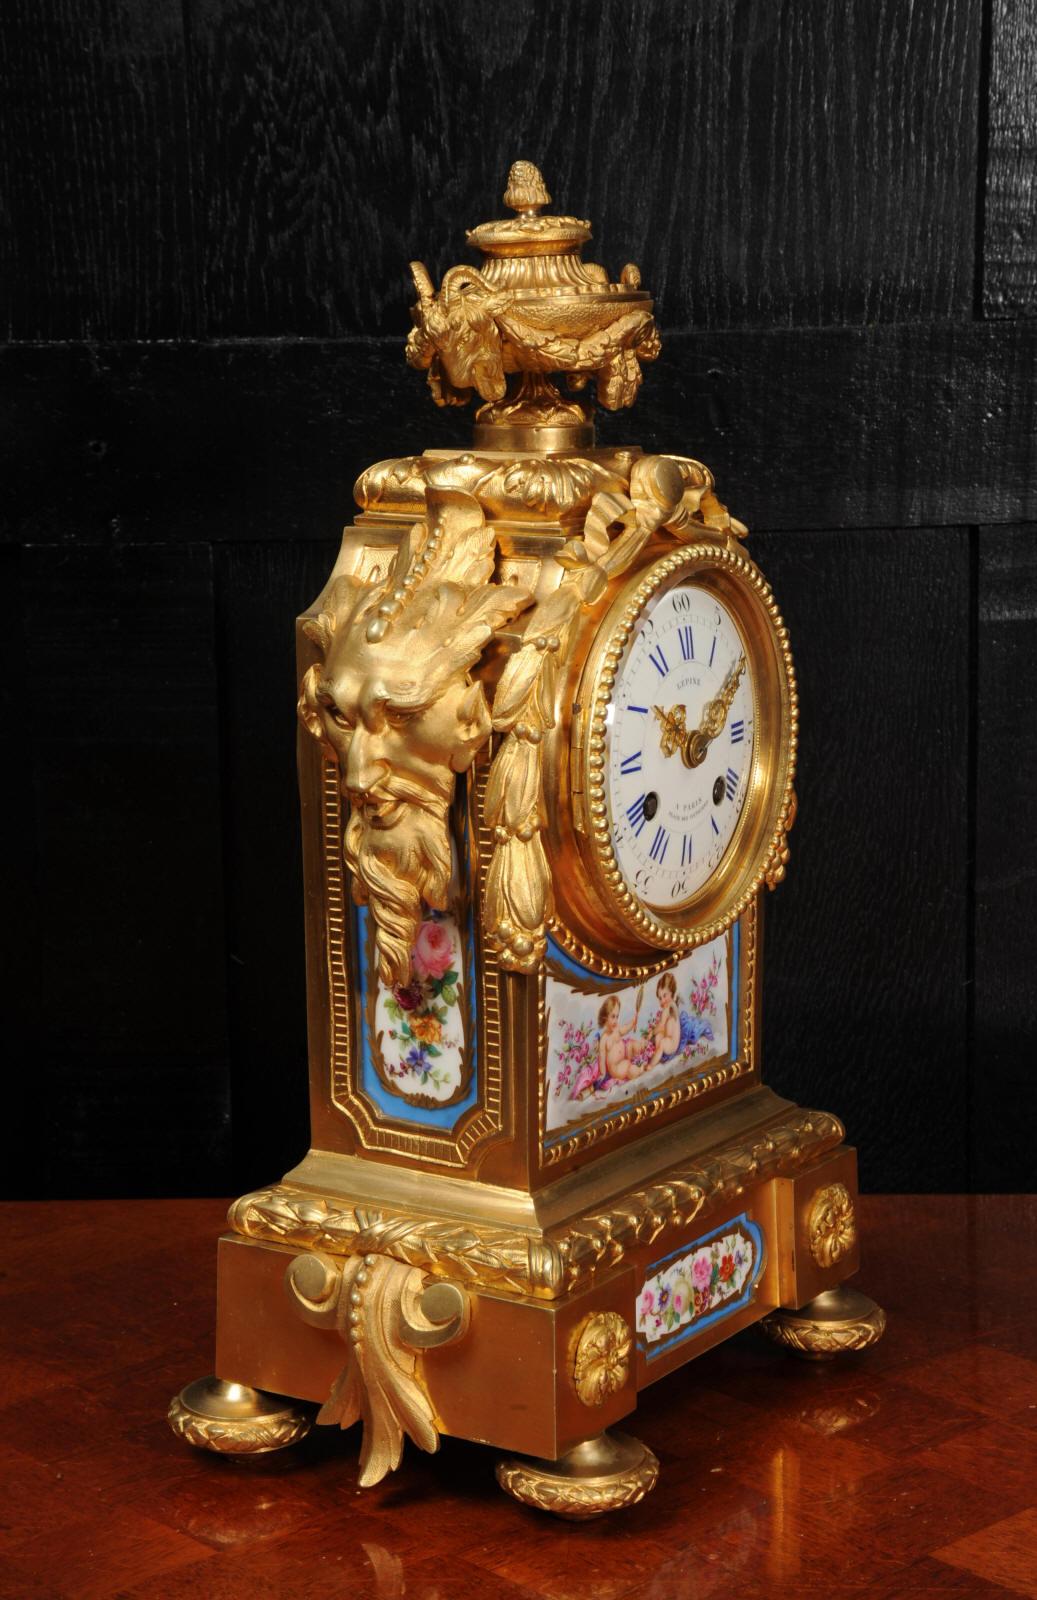 Early Ormolu and Sevres Porcelain Antique French Clock by Lepine Paris 7